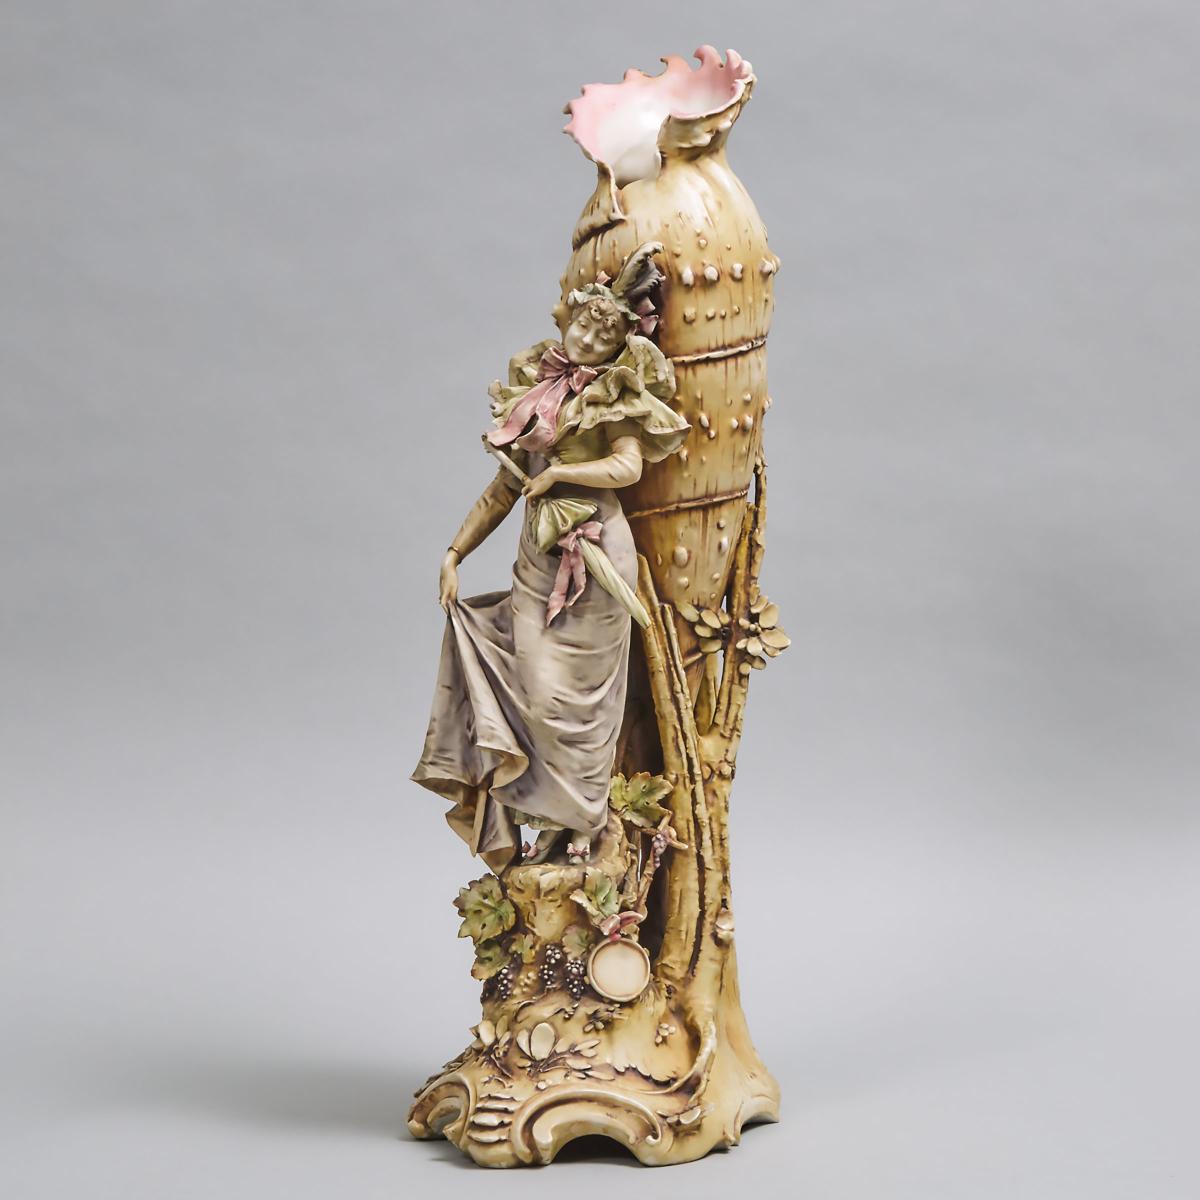 Riessner, Stellmacher & Kessel 'Amphora' Large Vase Group of a Lady with Parasol by a Shell, early 2